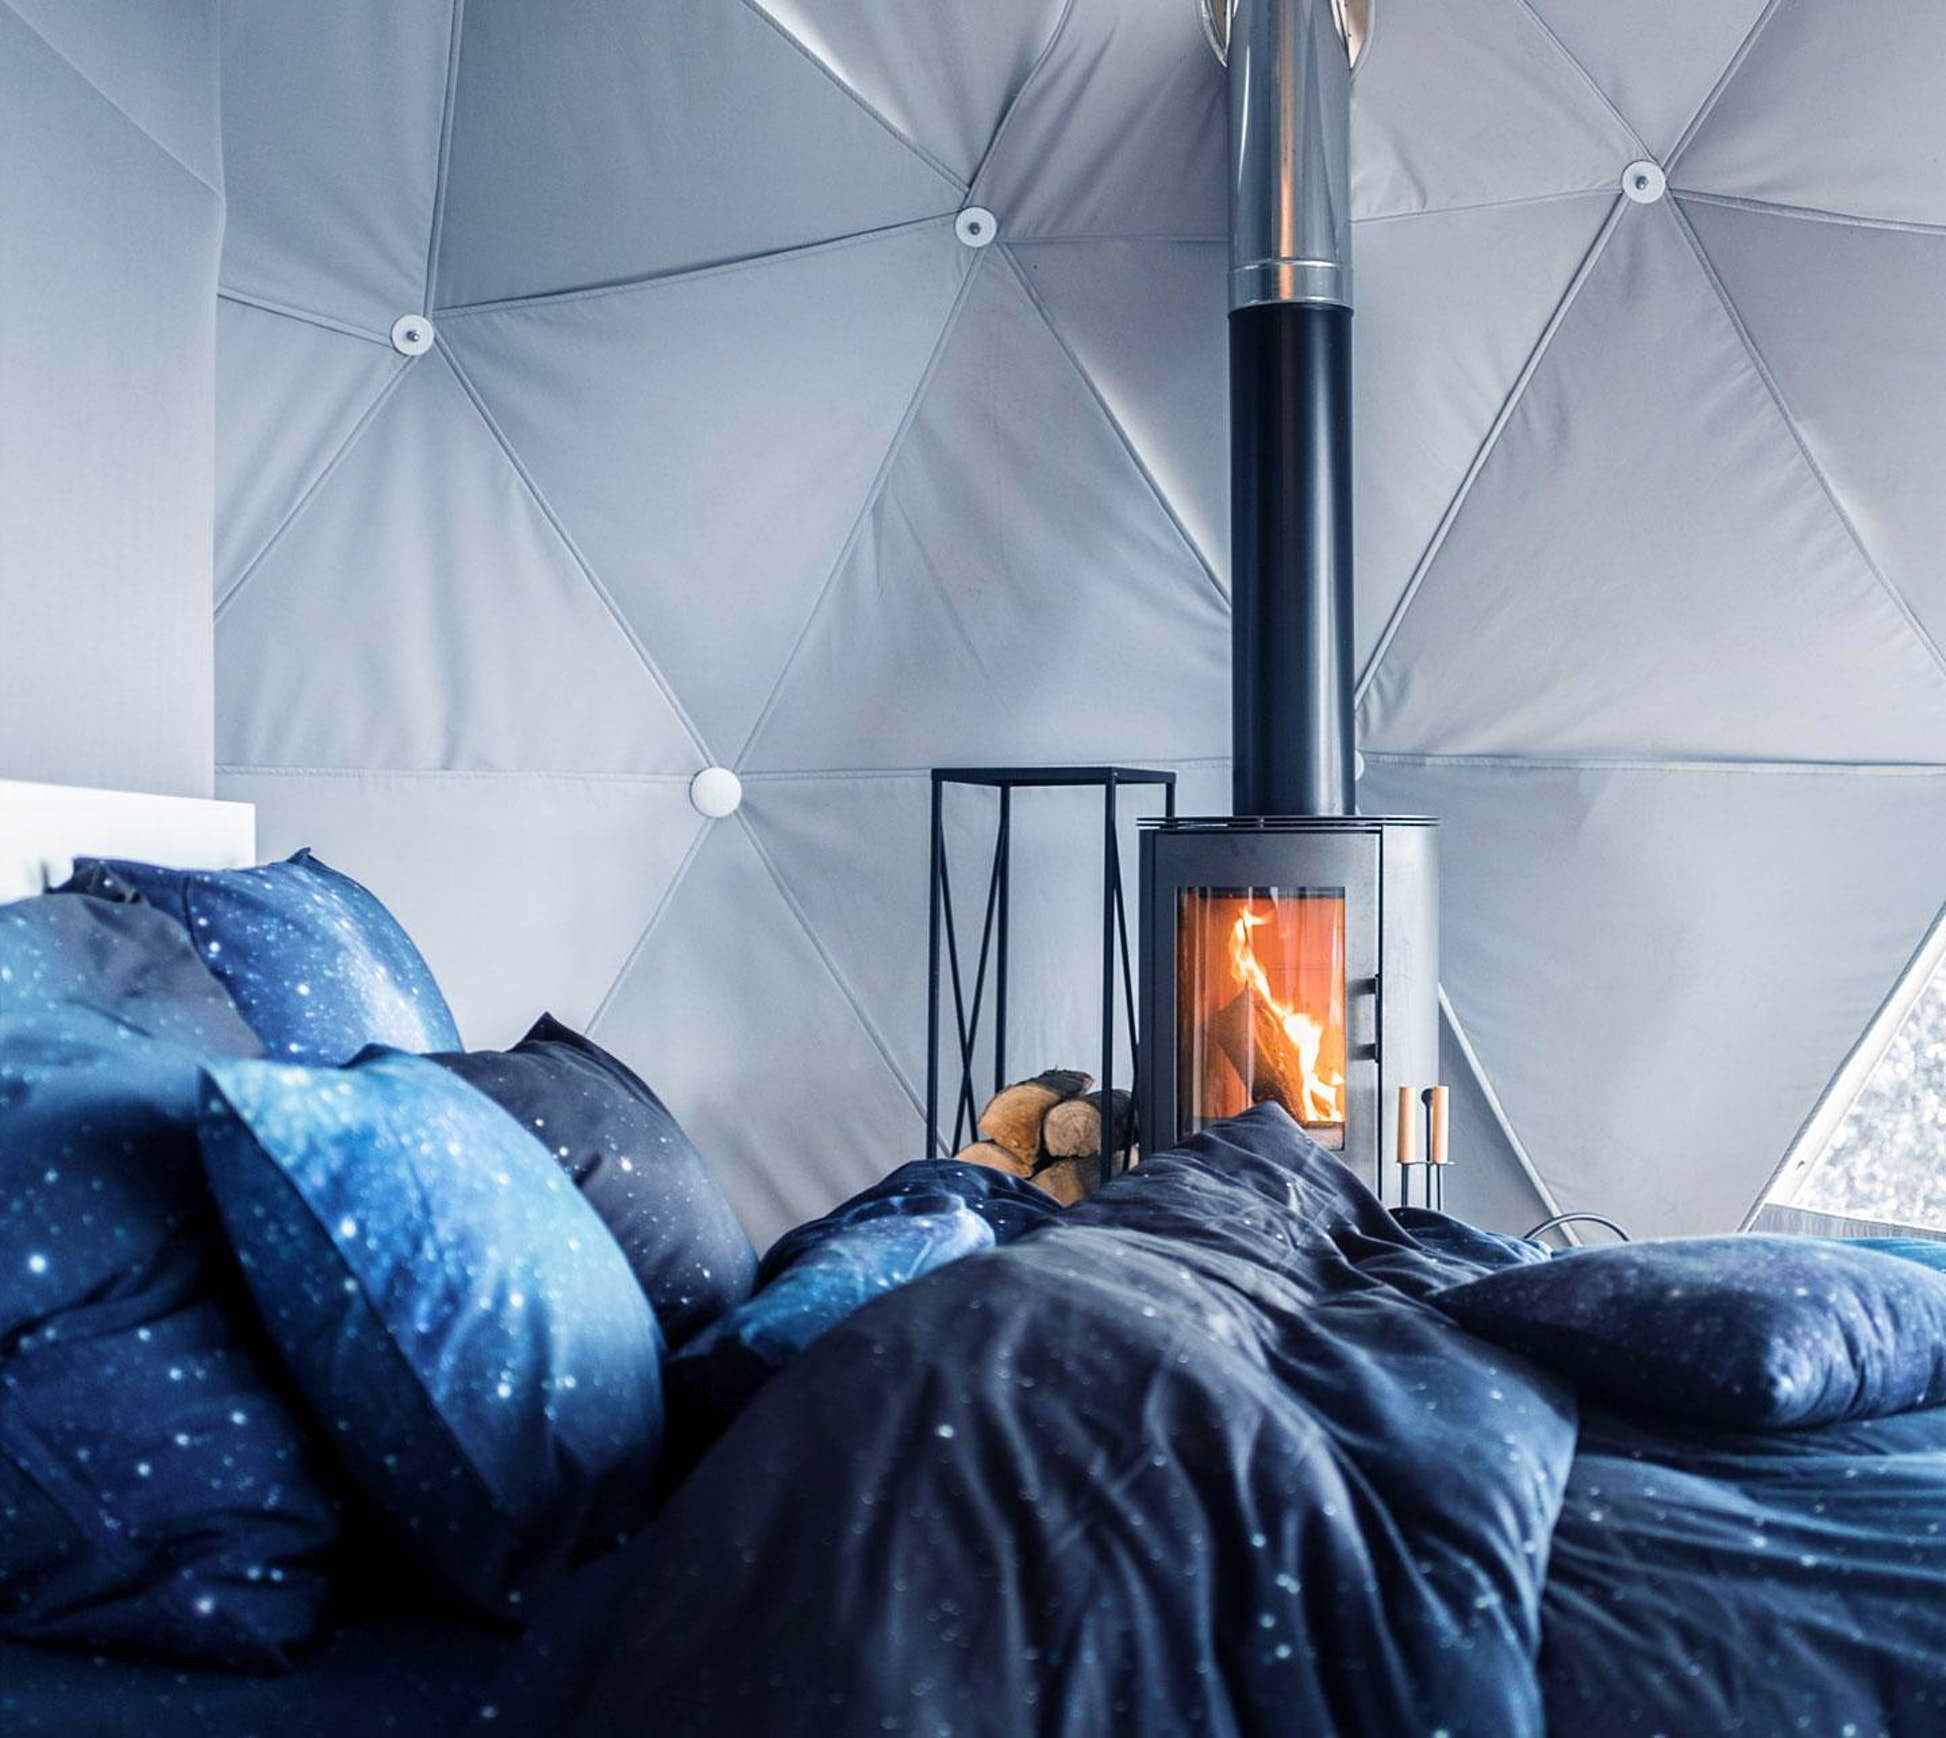 The interiors have cosy home comforts © The Domes